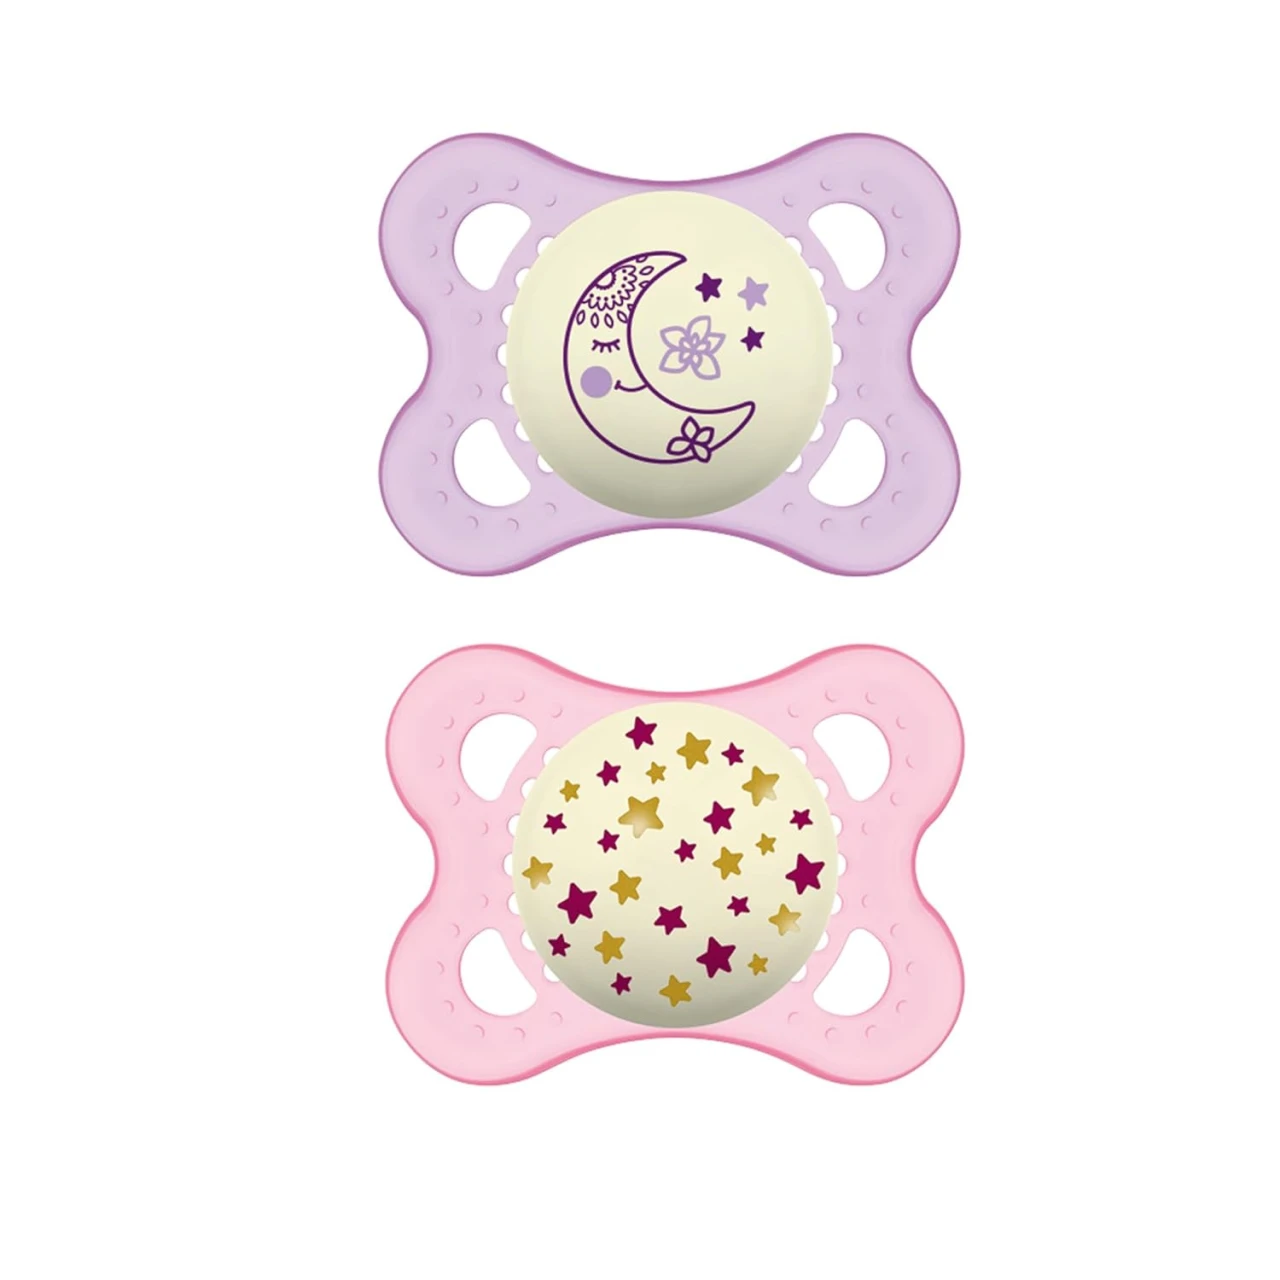 MAM Night Pacifiers (2 Pack, 1 Sterilizing Pacifier Case), MAM Pacifiers 0-6 Months, Best Pacifier for Breastfed Babies, Glow in the Dark Pacifier, Baby Girl Pacifier